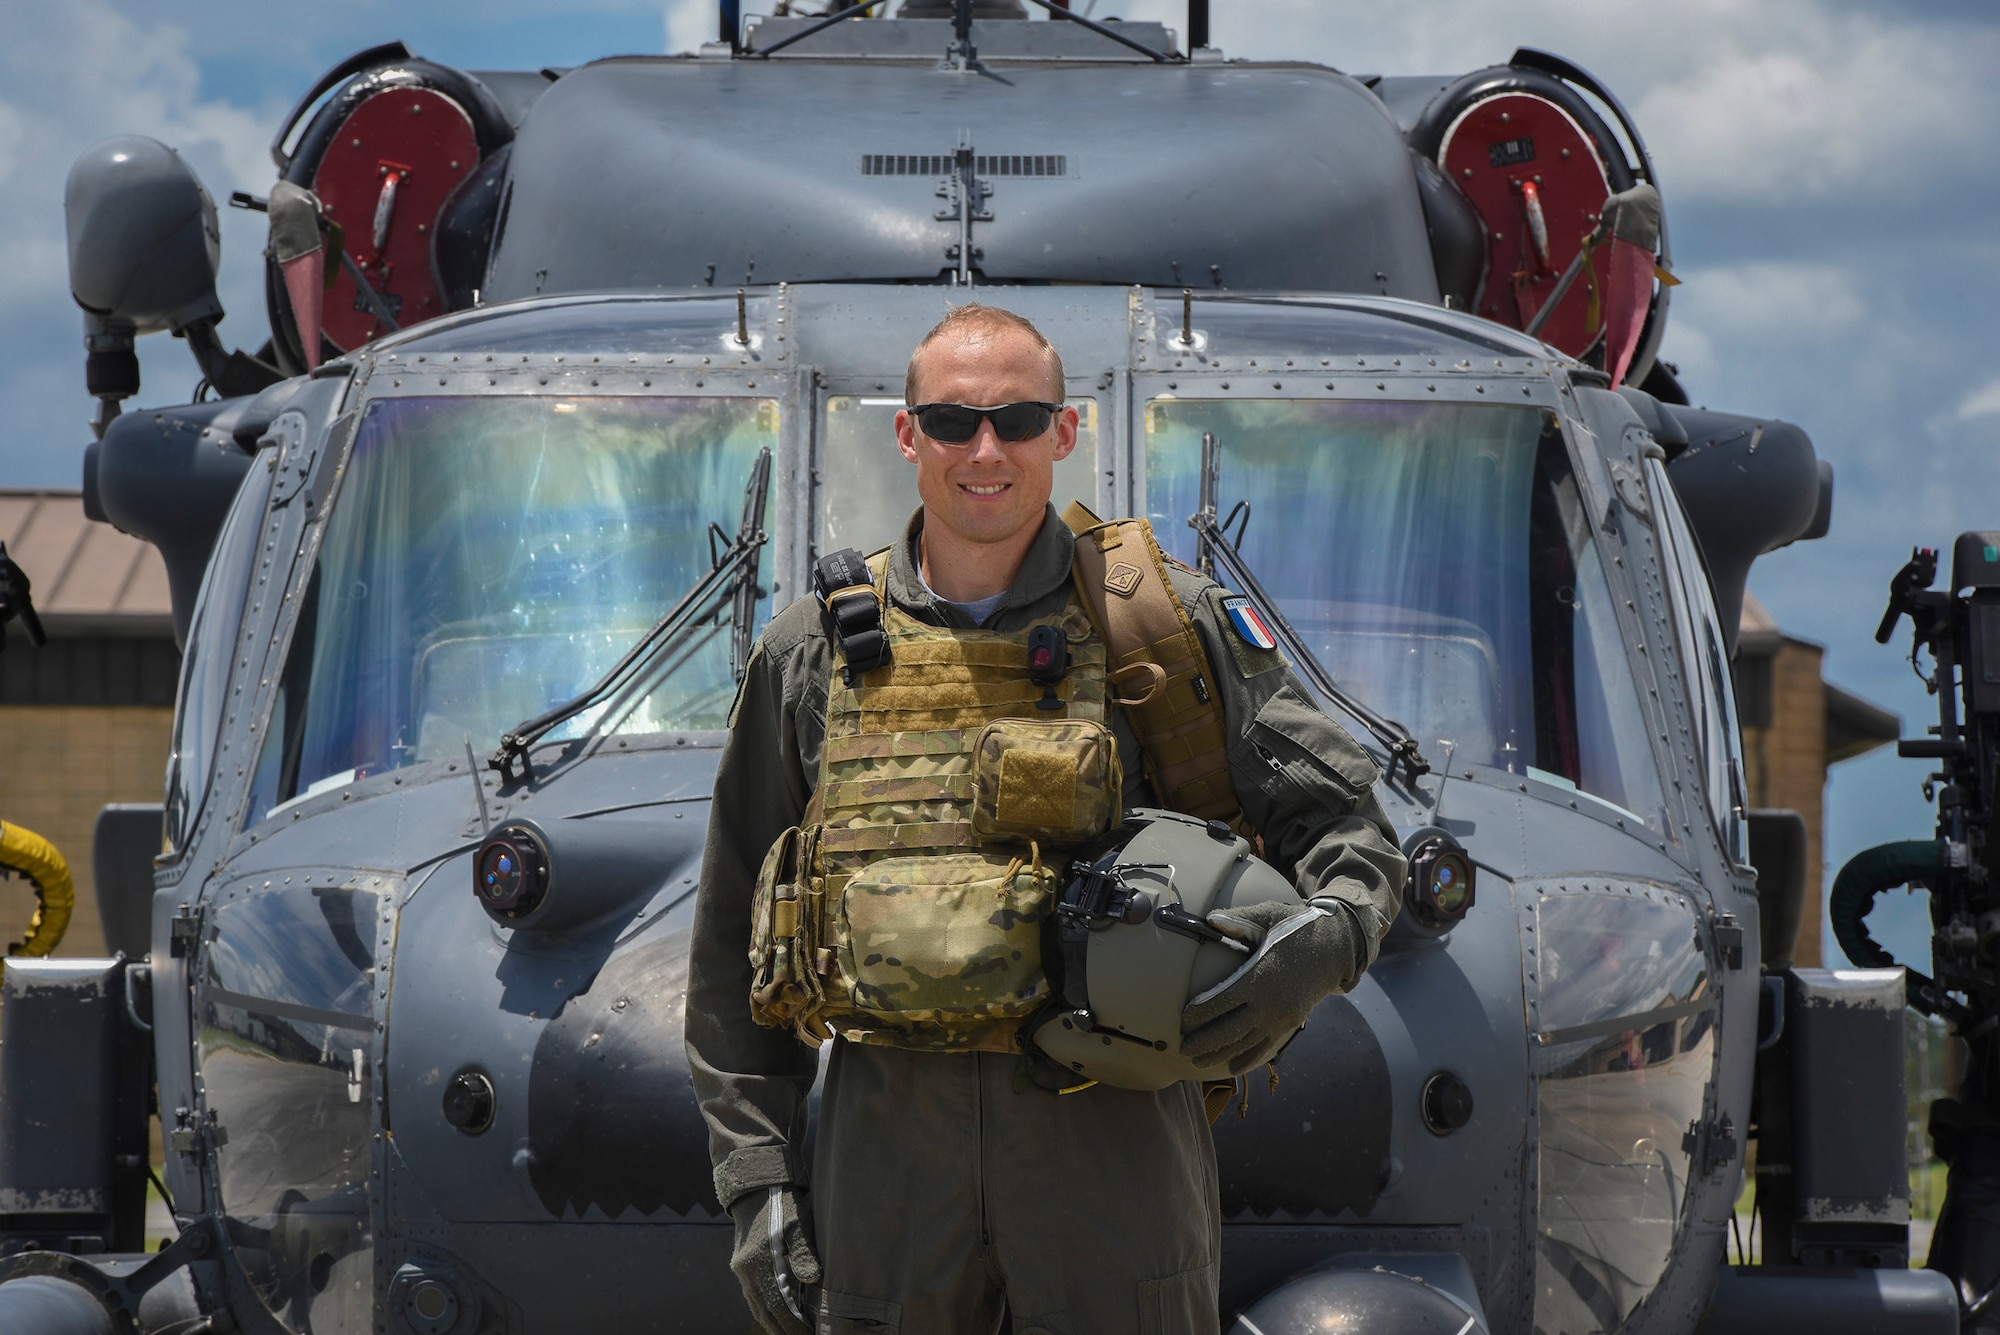 Commandant Micka, a French exchange pilot and assistant director of operations for Moody’s 41st Rescue Squadron, stands in front of an HH-60G Pavehawk, Aug. 2, 2017, at Moody Air Force Base, Ga. Prior to his arrival at the 41st RQS, Micka transitioned from flying the French Air Force’s EC-725 Caracal helicopter to learn the HH-60. Since his childhood, Micka aspired to serve and fly for the French and U.S. military as a rescue pilot. (U.S. Air Force photo by Senior Airman Greg Nash)